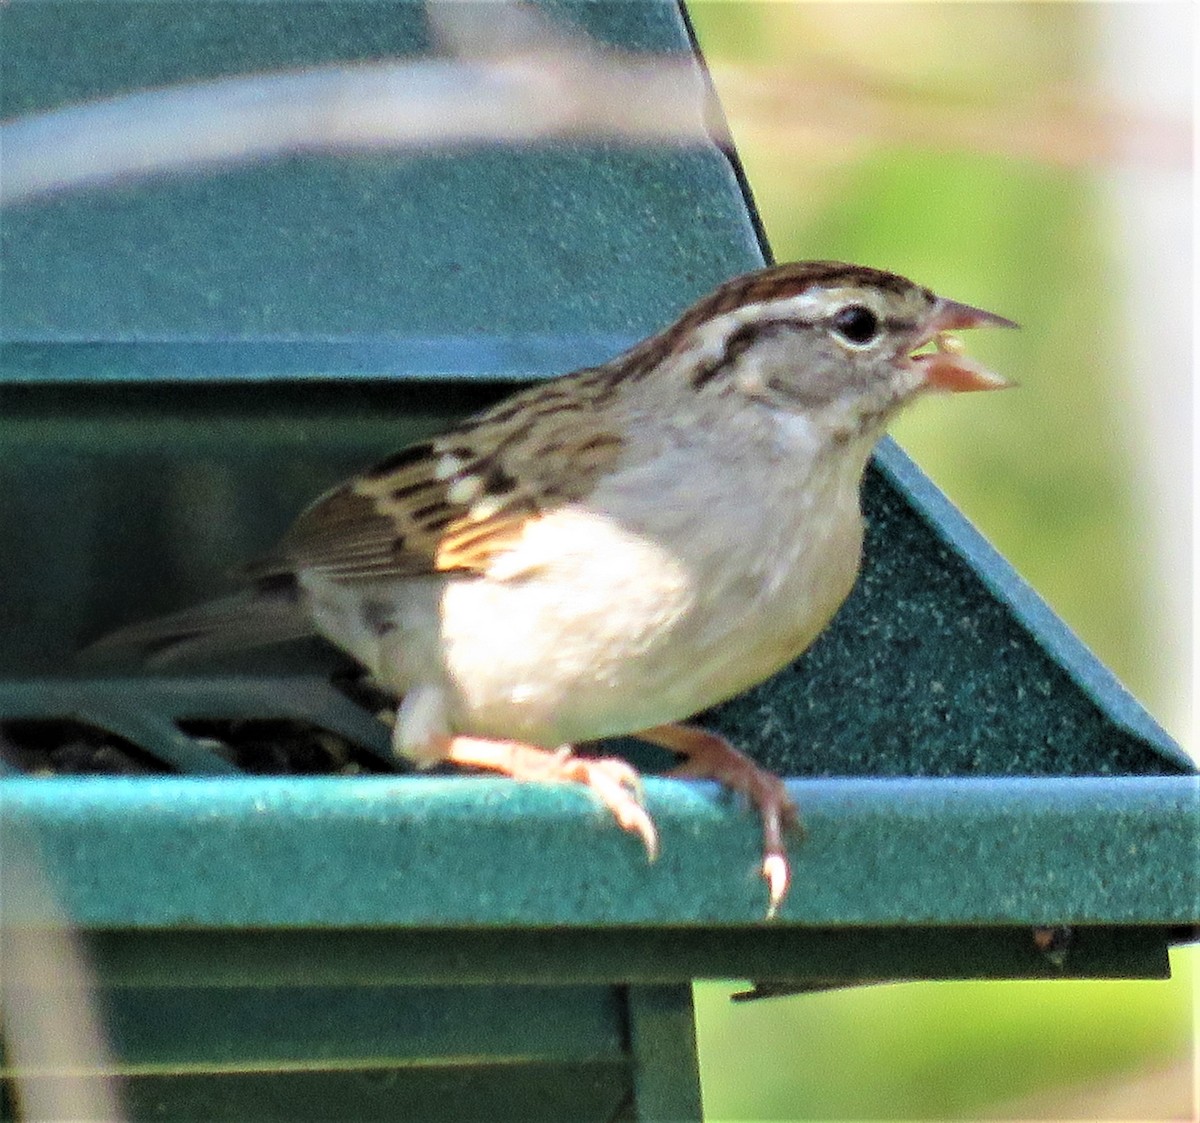 Chipping Sparrow - judy parrot-willis